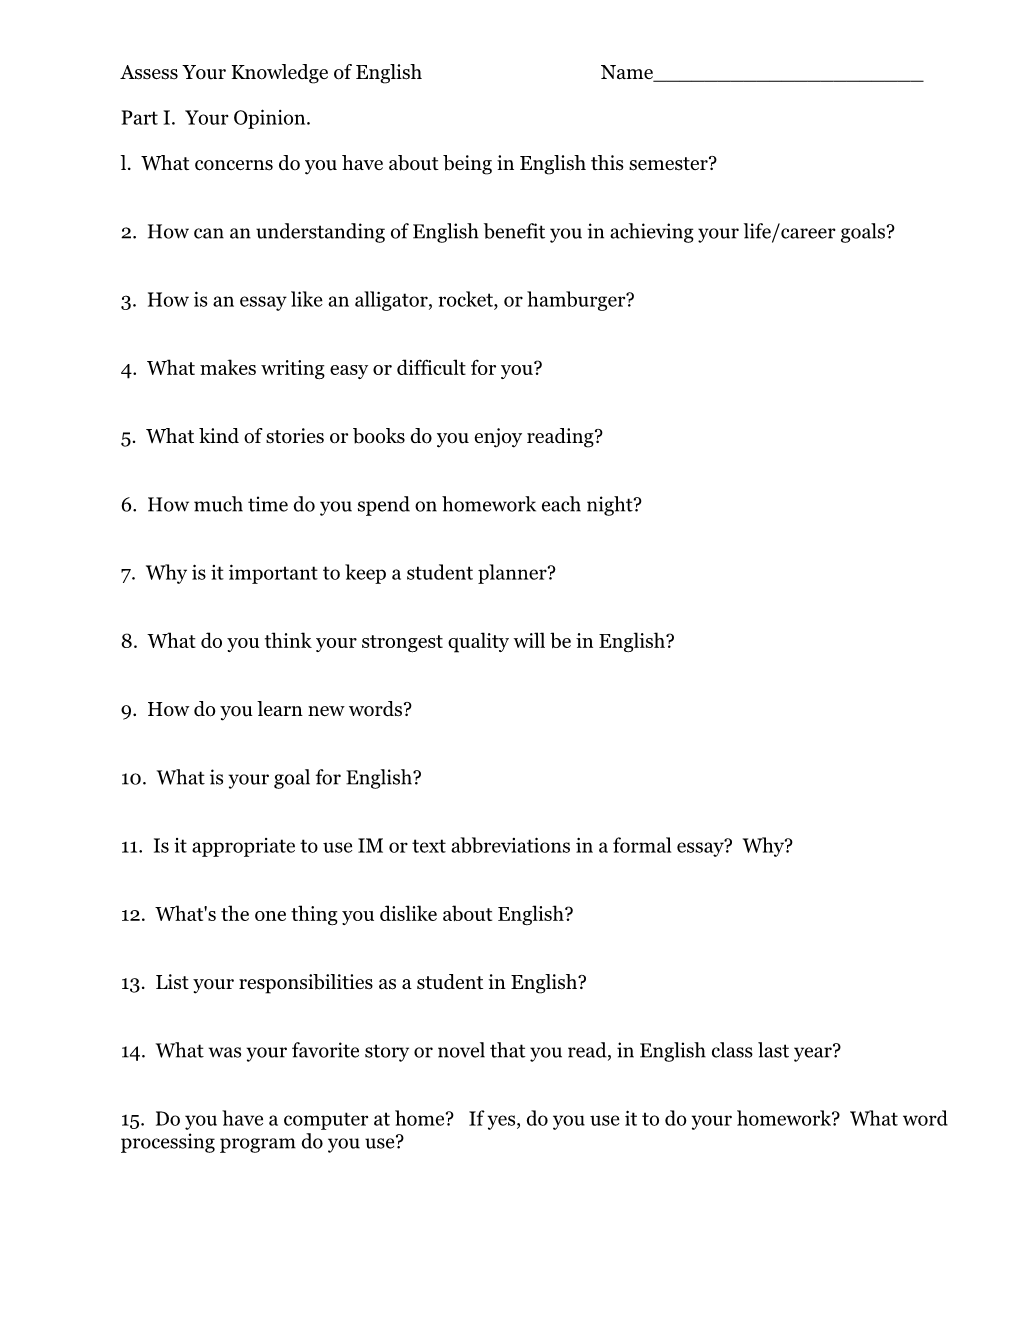 Assess Your Knowledge of English